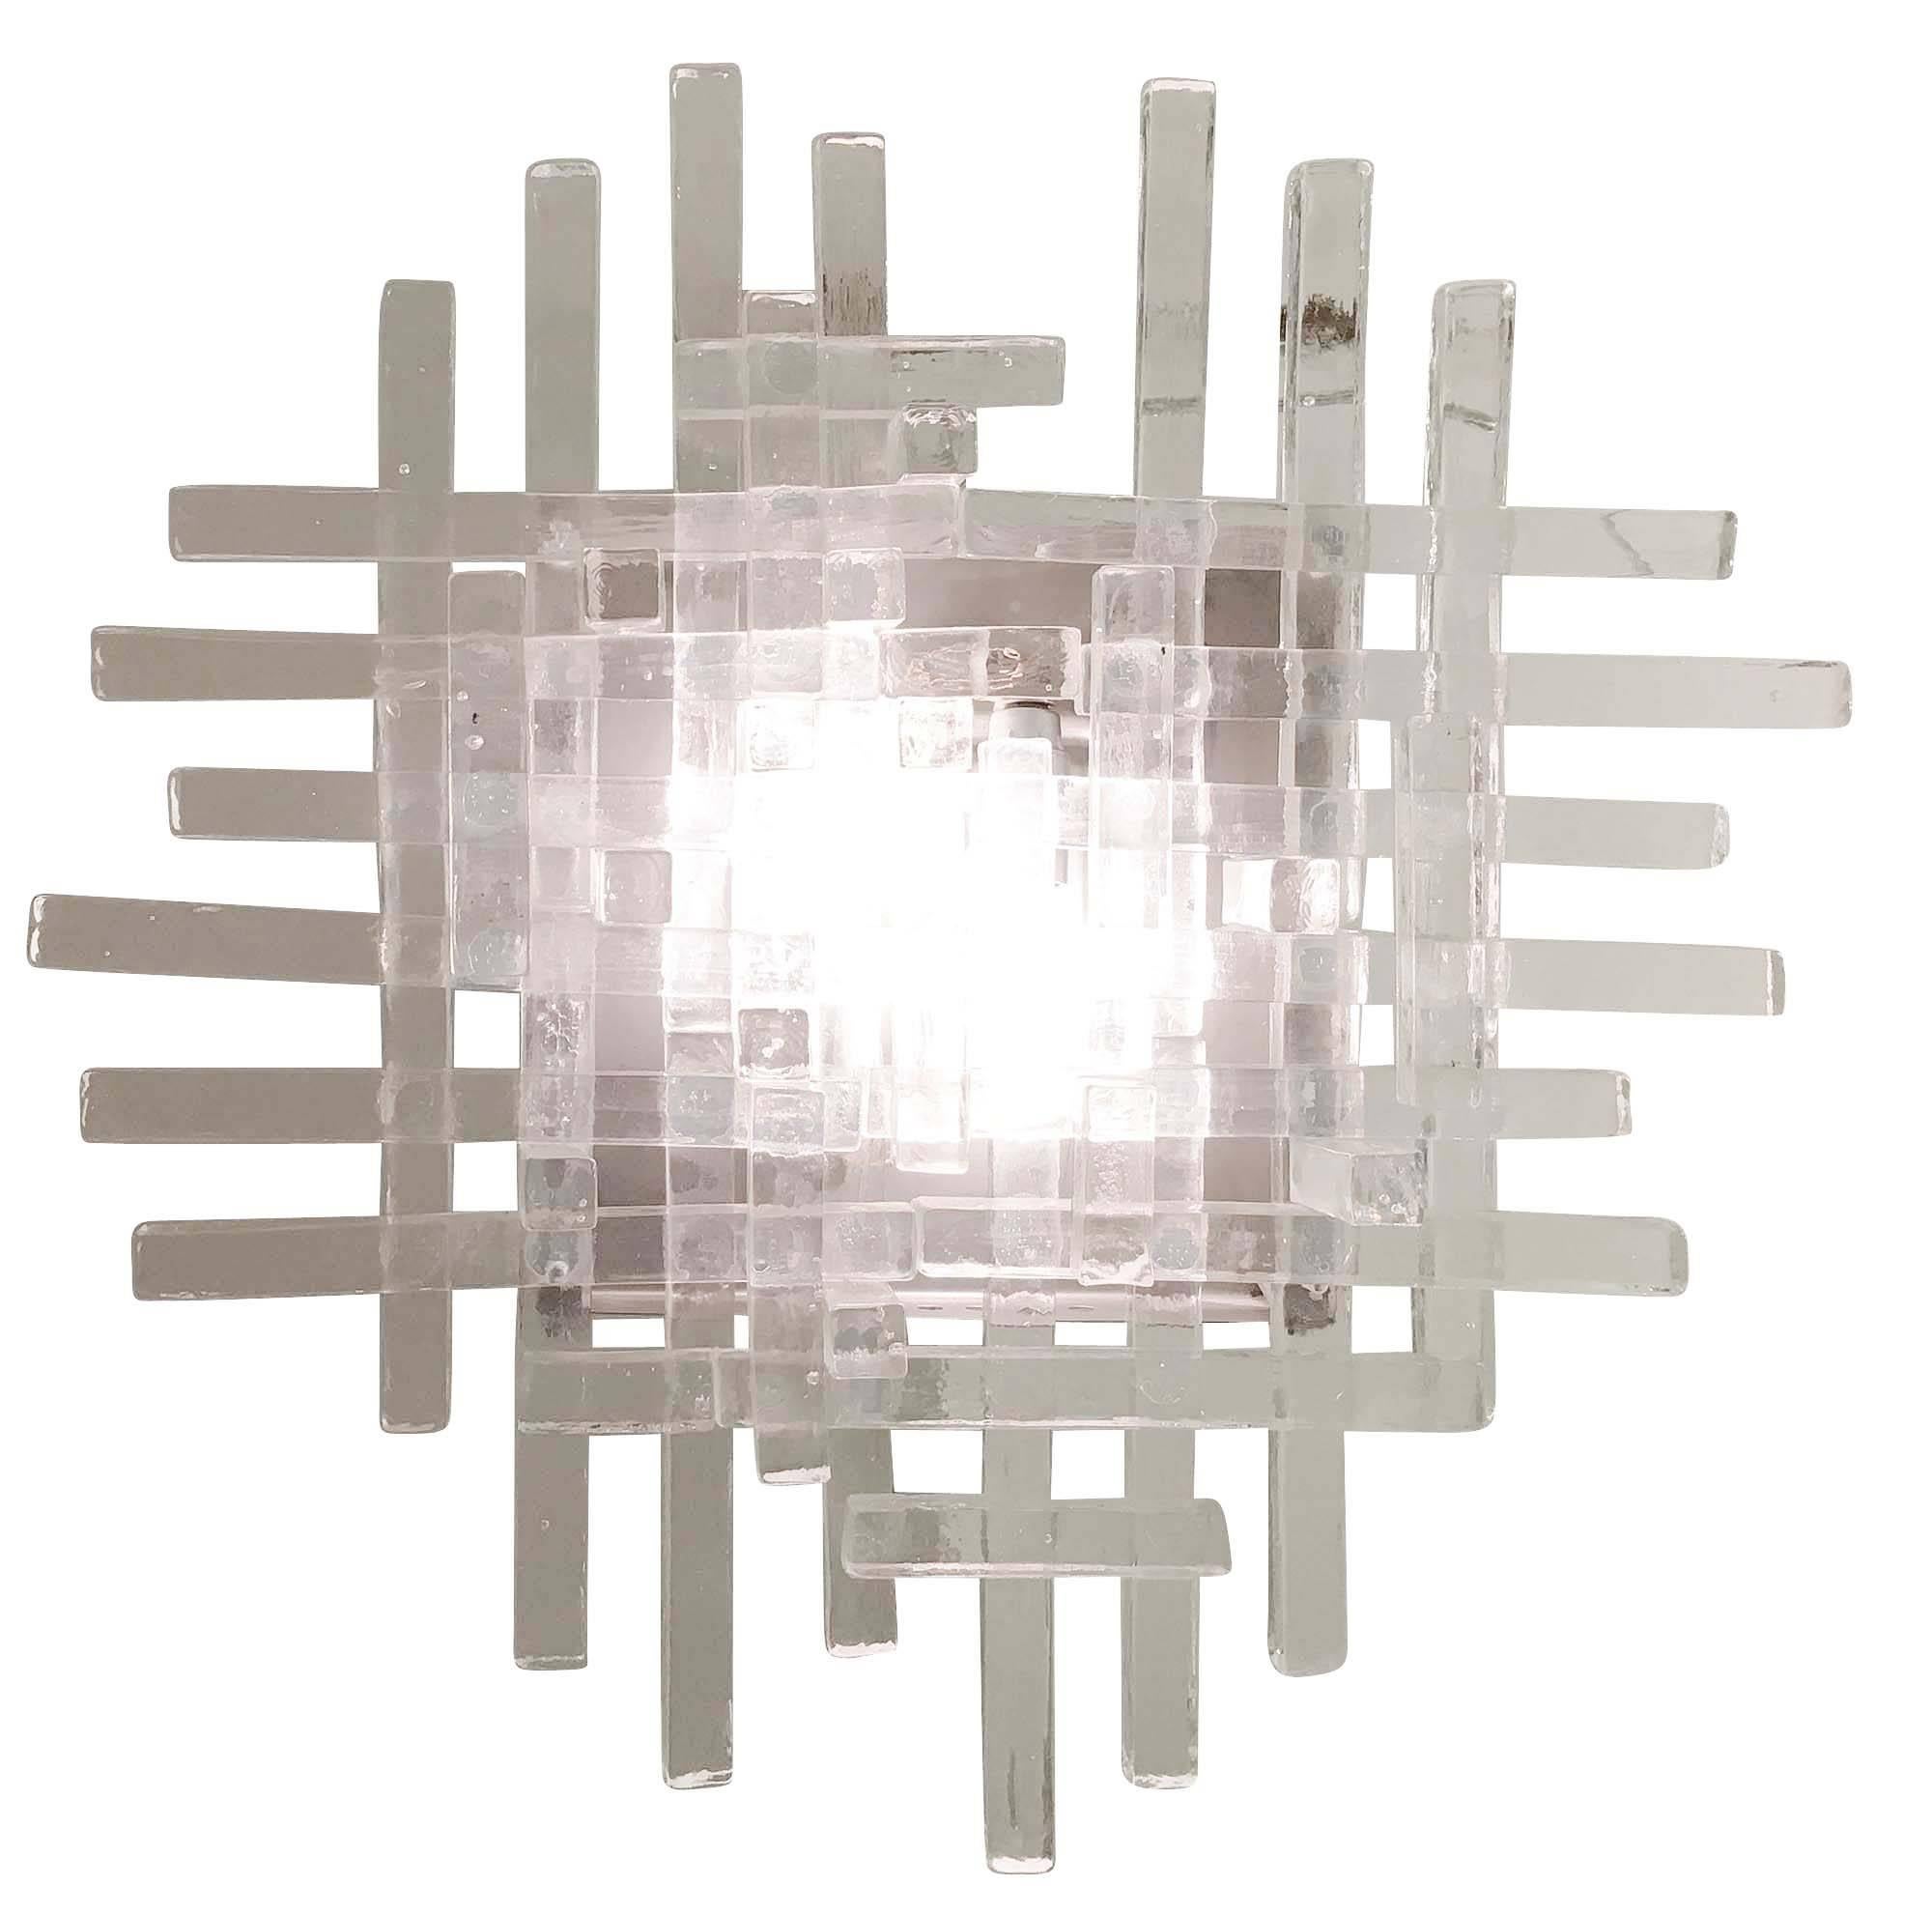 Stunning Poliarte wall light composed of dozens of glass rectangles of different sizes stacked together. The glass is clear but textured. Holds two candelabra sockets on a brushed metal frame. Six available.
